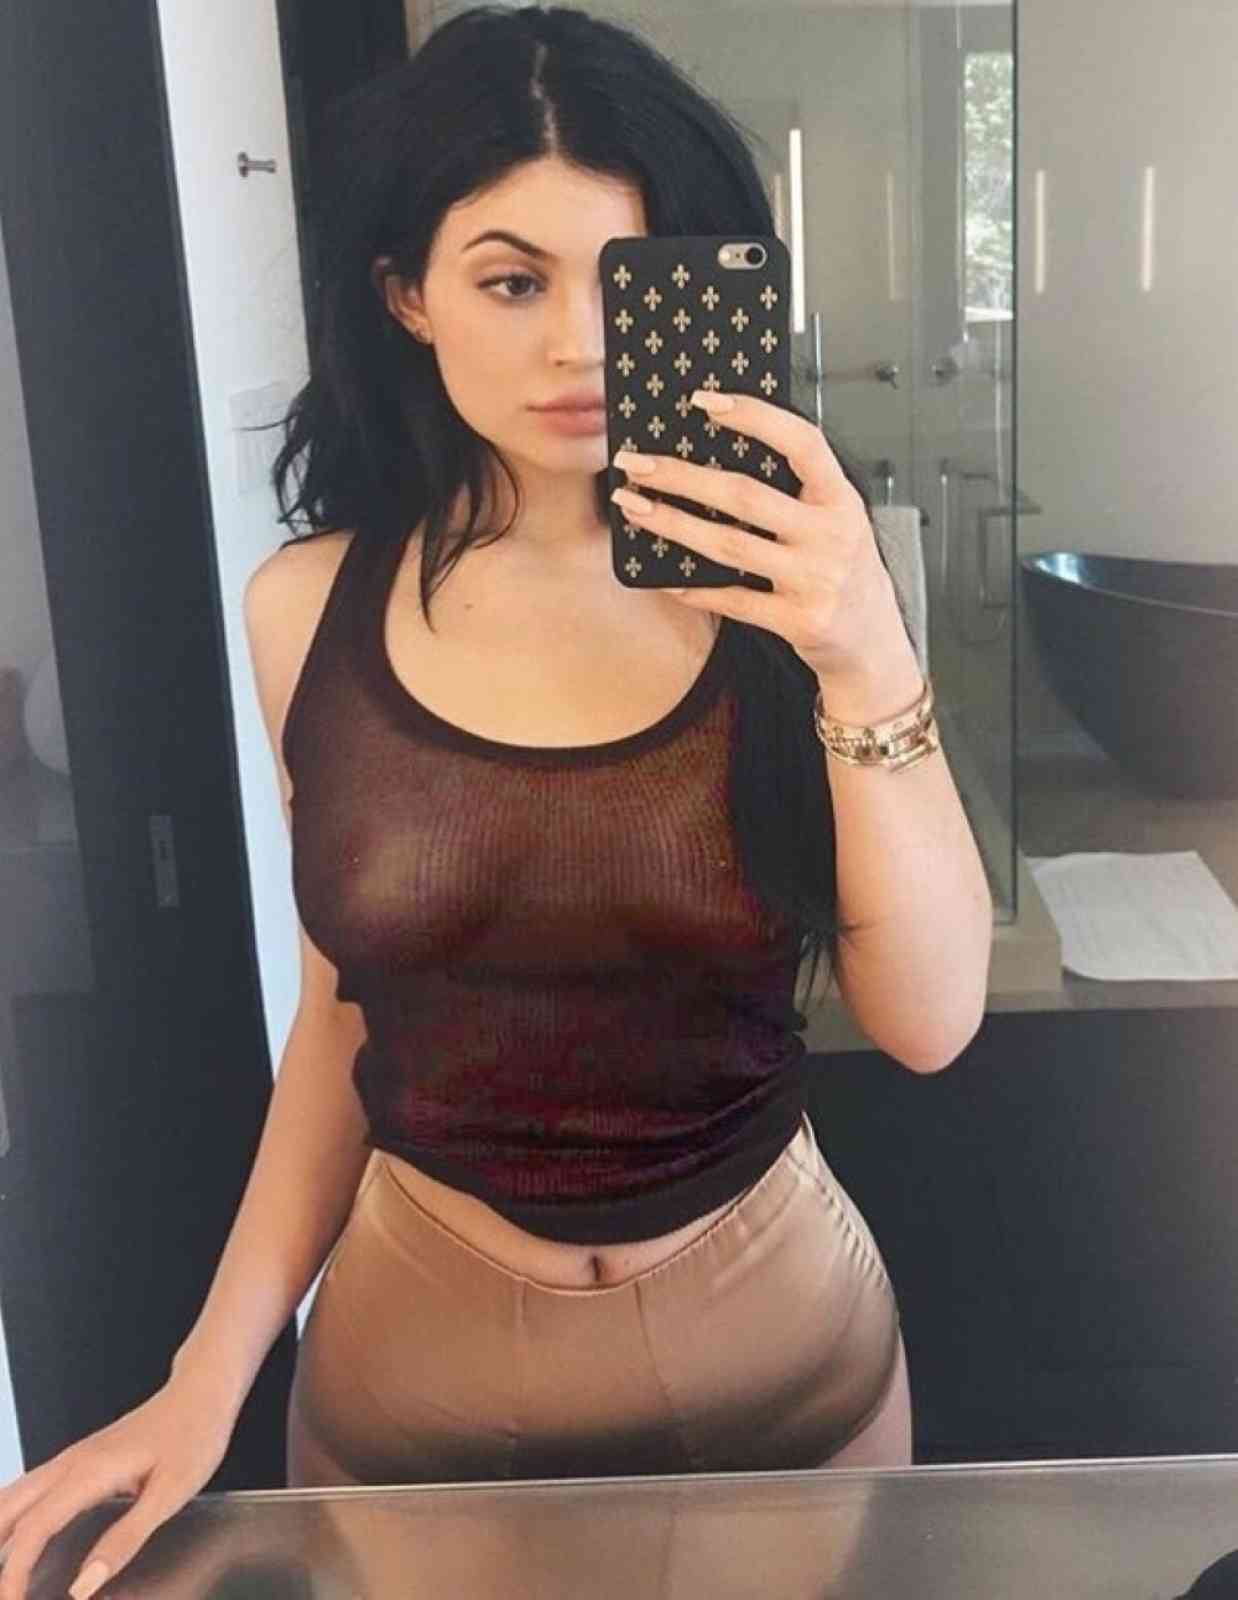 JERK OFF CHALLENGE: KENDALL AND KYLIE JENNER!